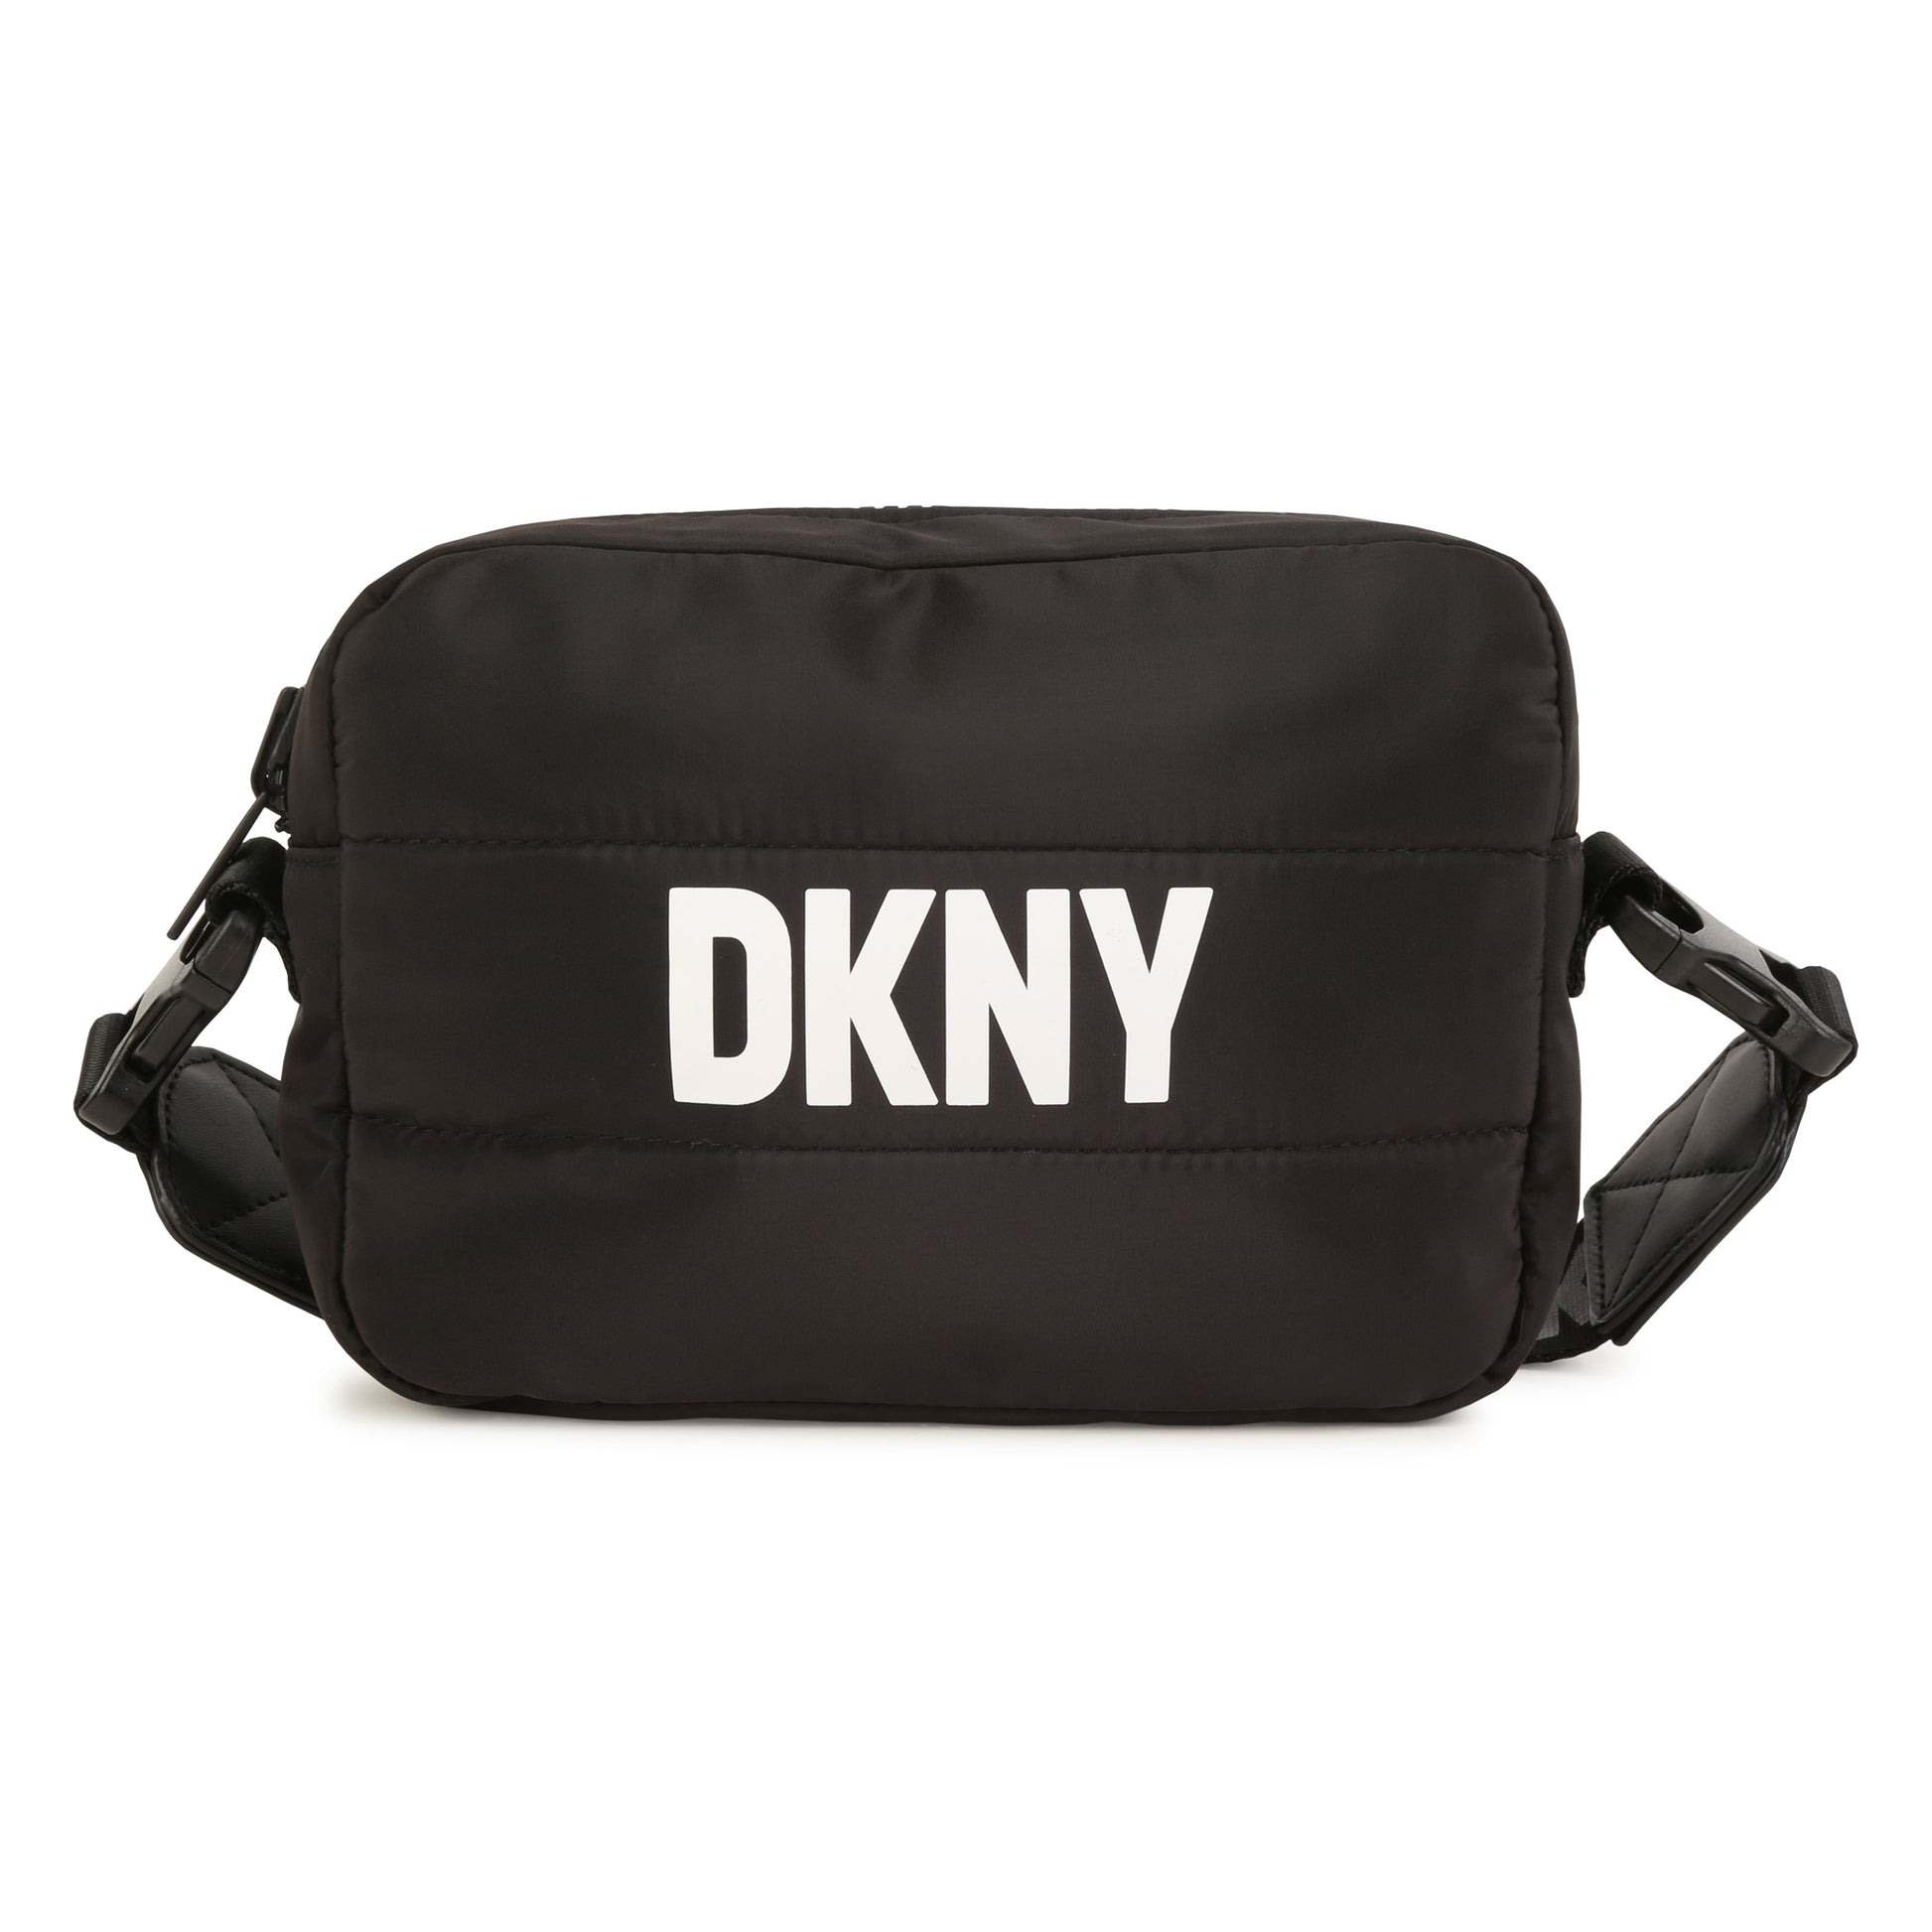 DKNY Bags and Wallets - shop online